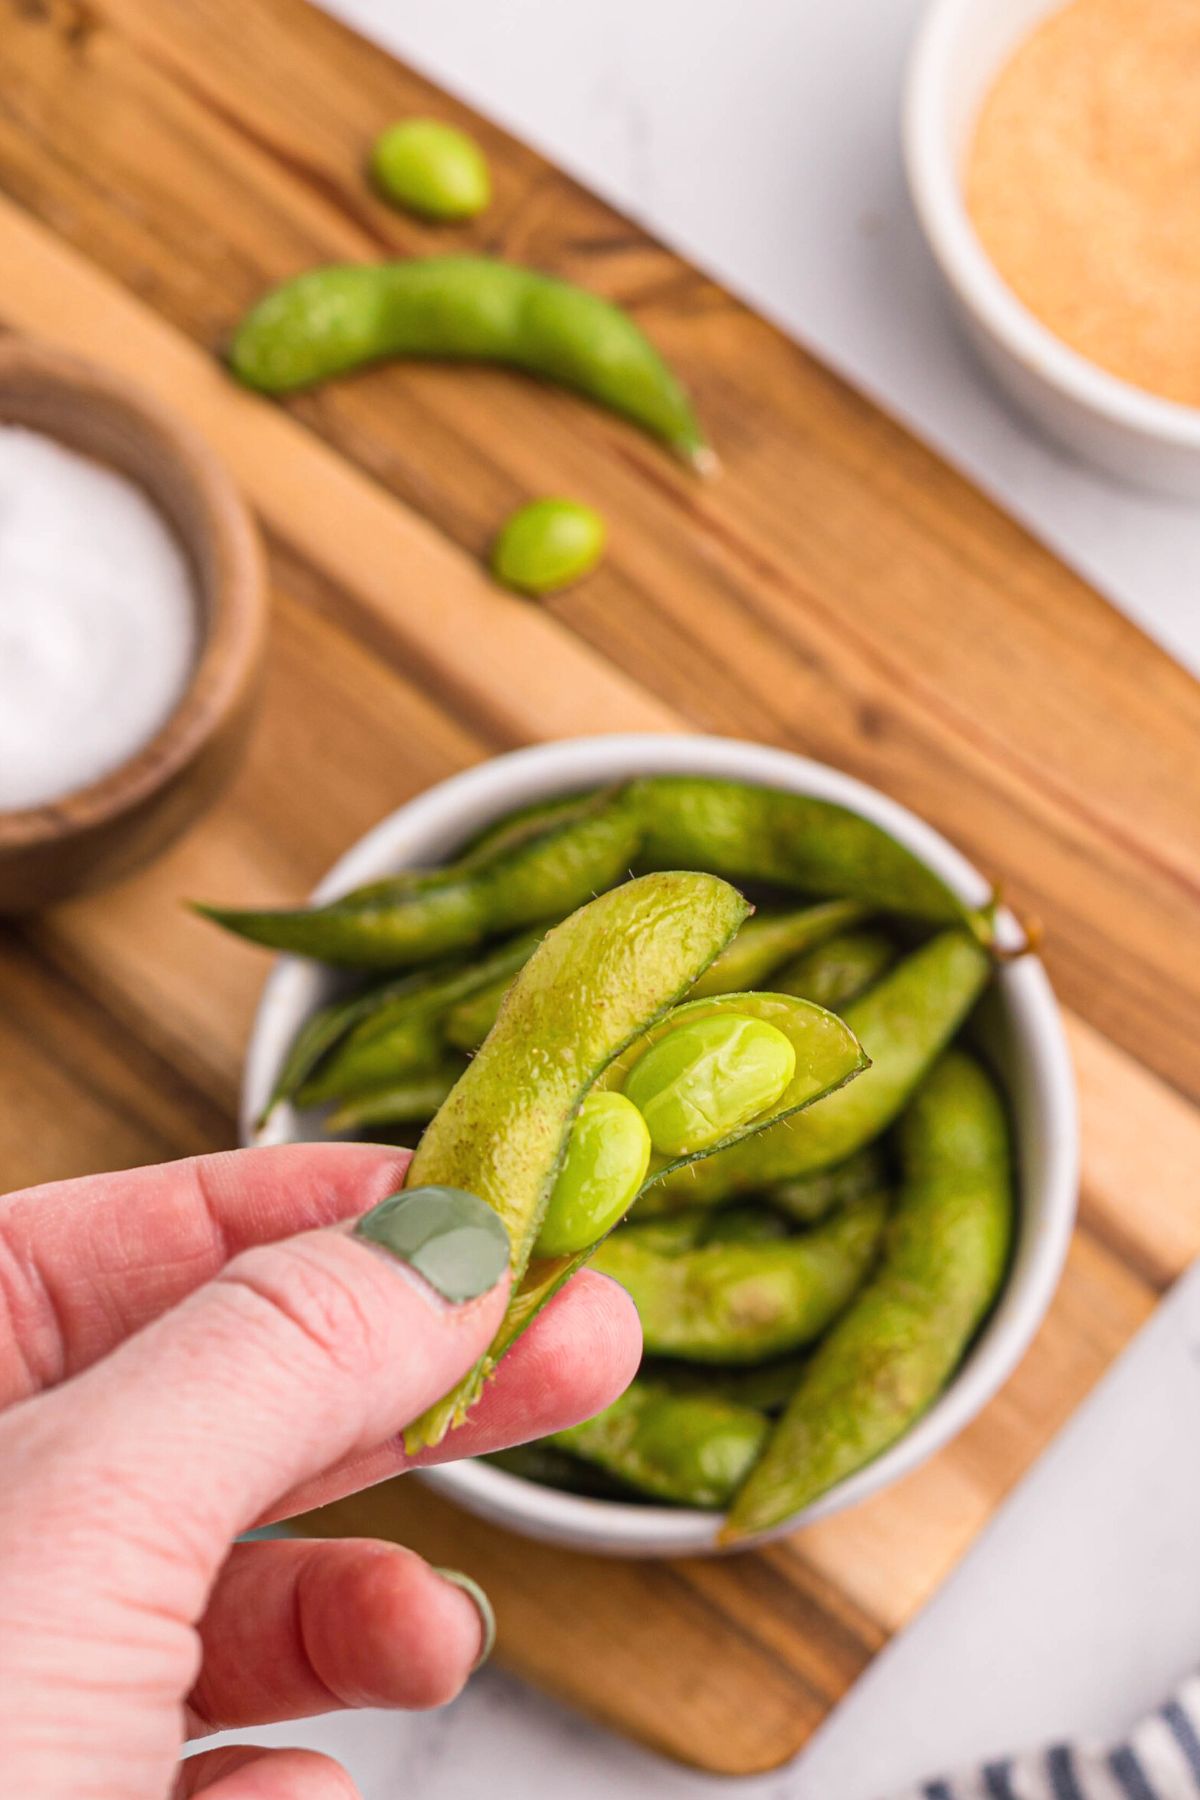 Edamame pods with seeds being removed after being cooked in the air fryer